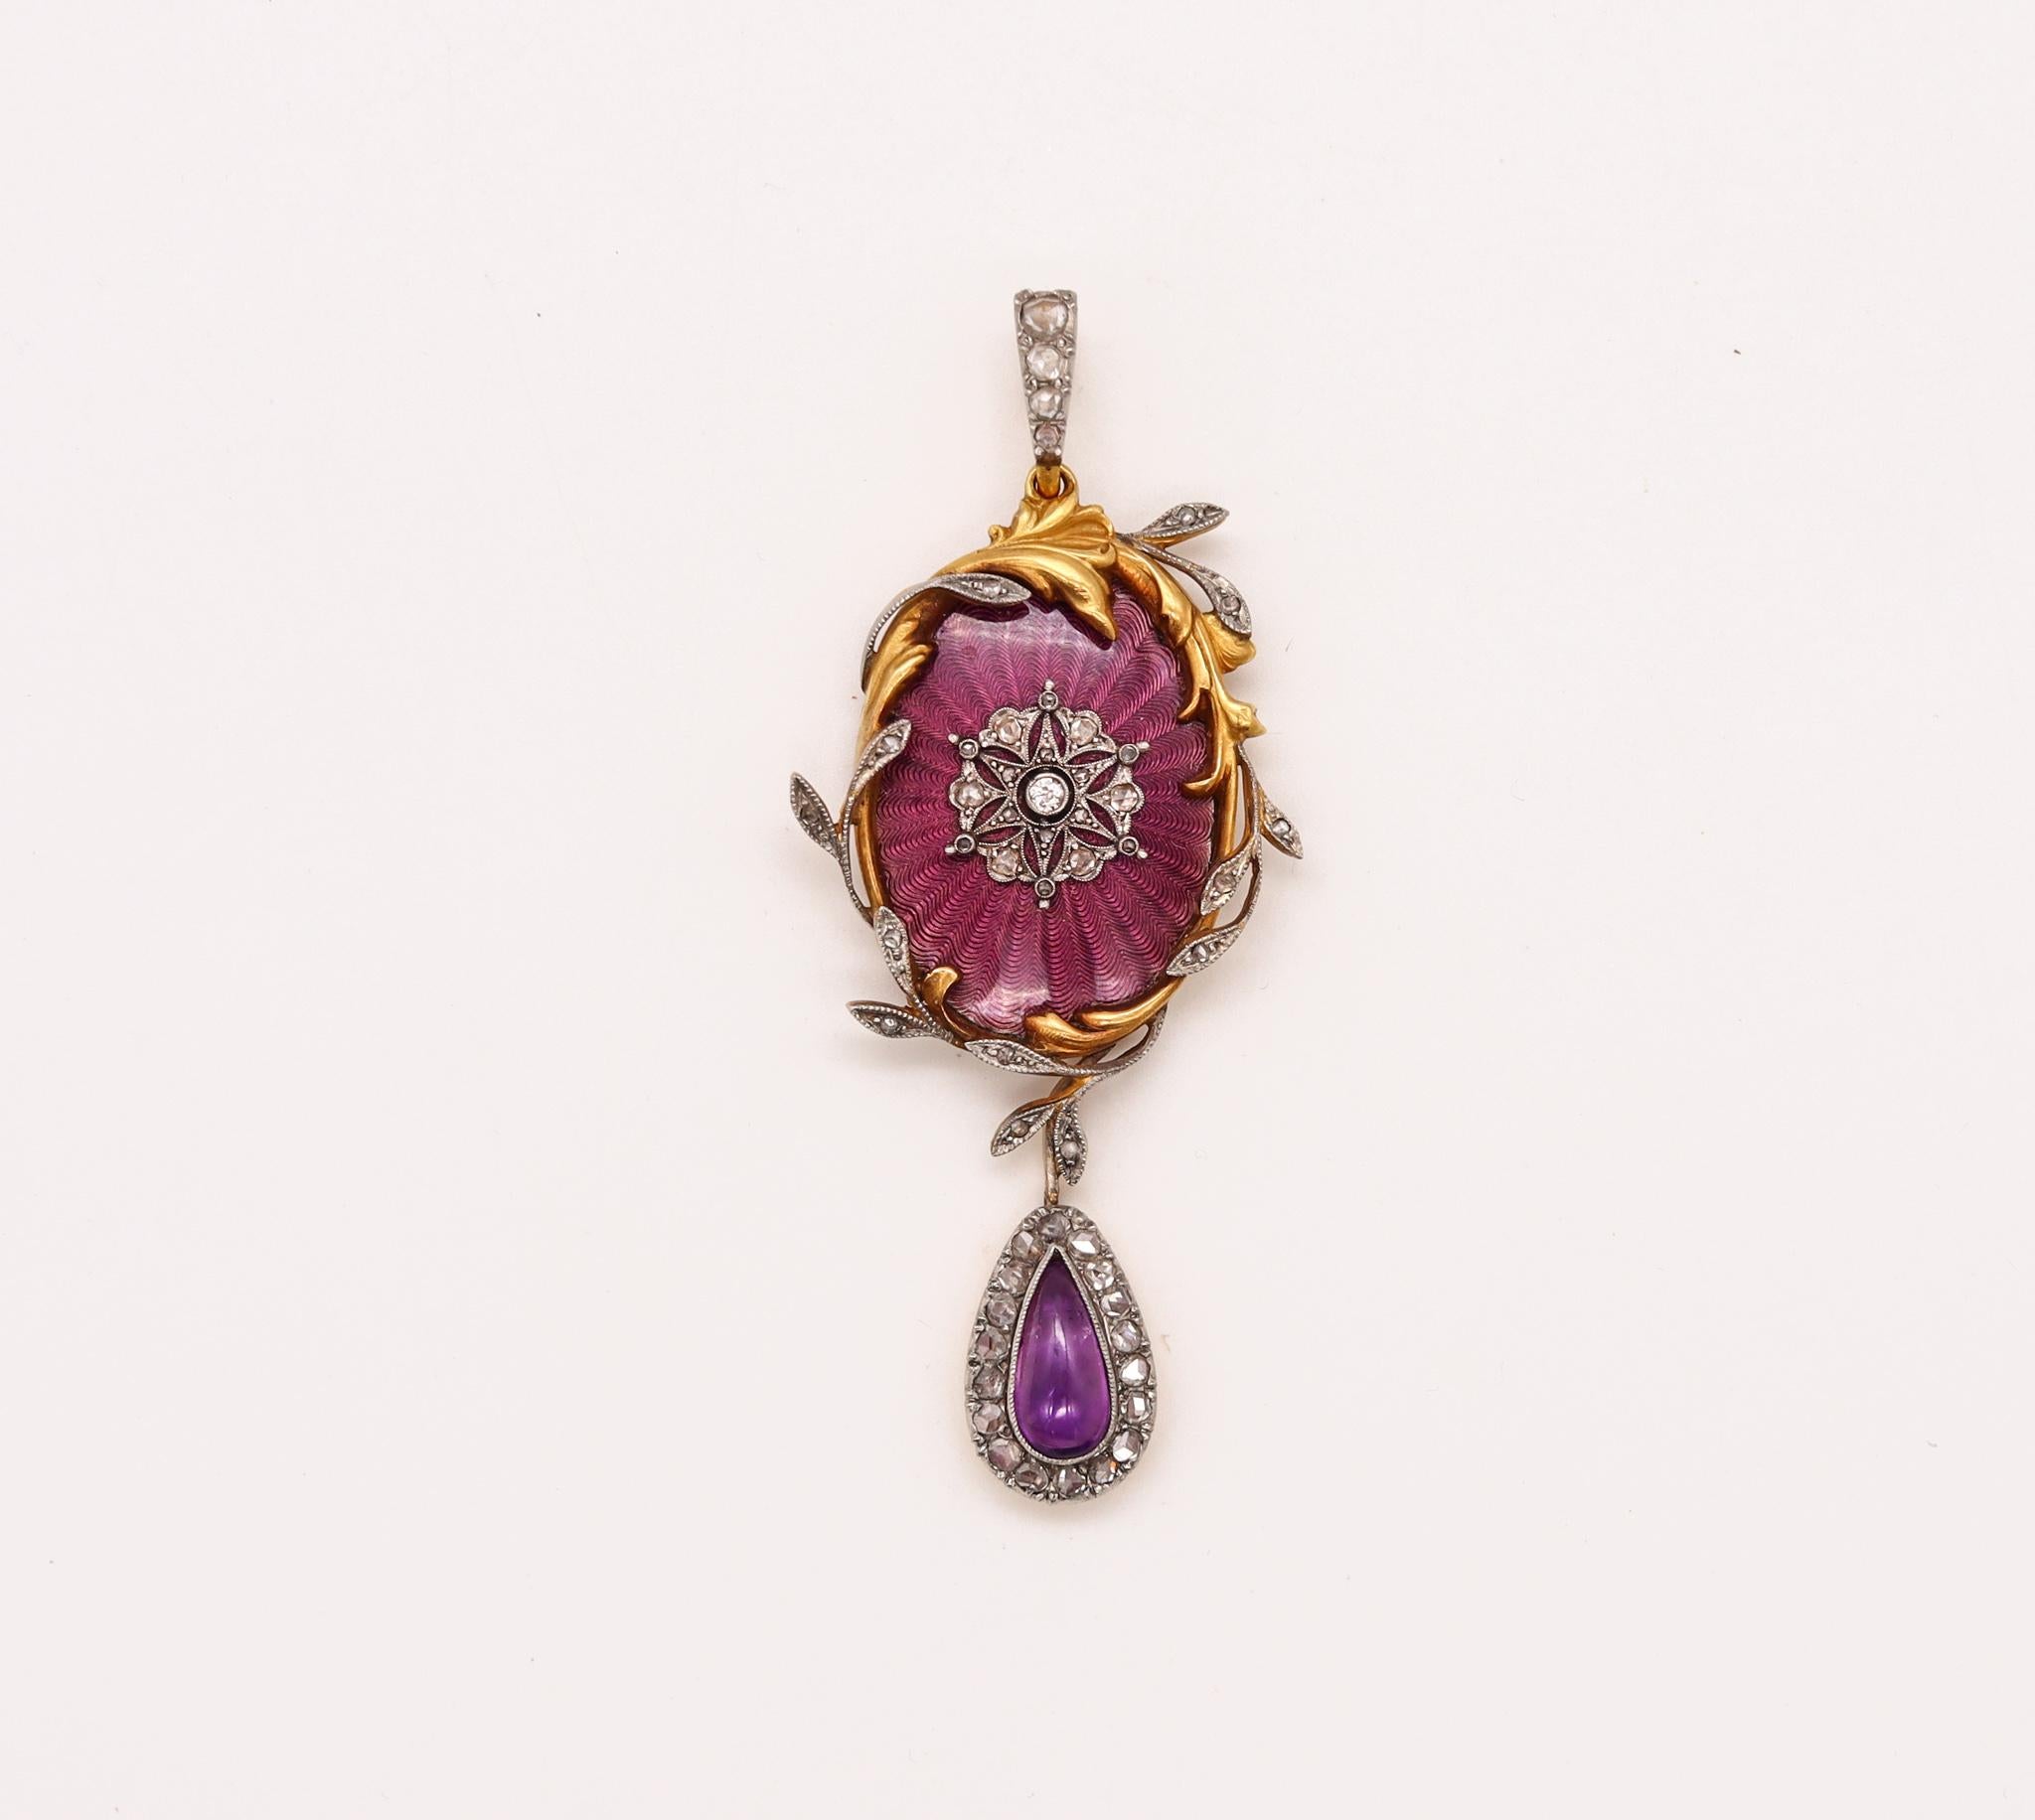 Mixed Cut French 1790 Georgian Guilloche Enameled Pendant 18Kt Gold 4.26 Diamonds Amethyst For Sale